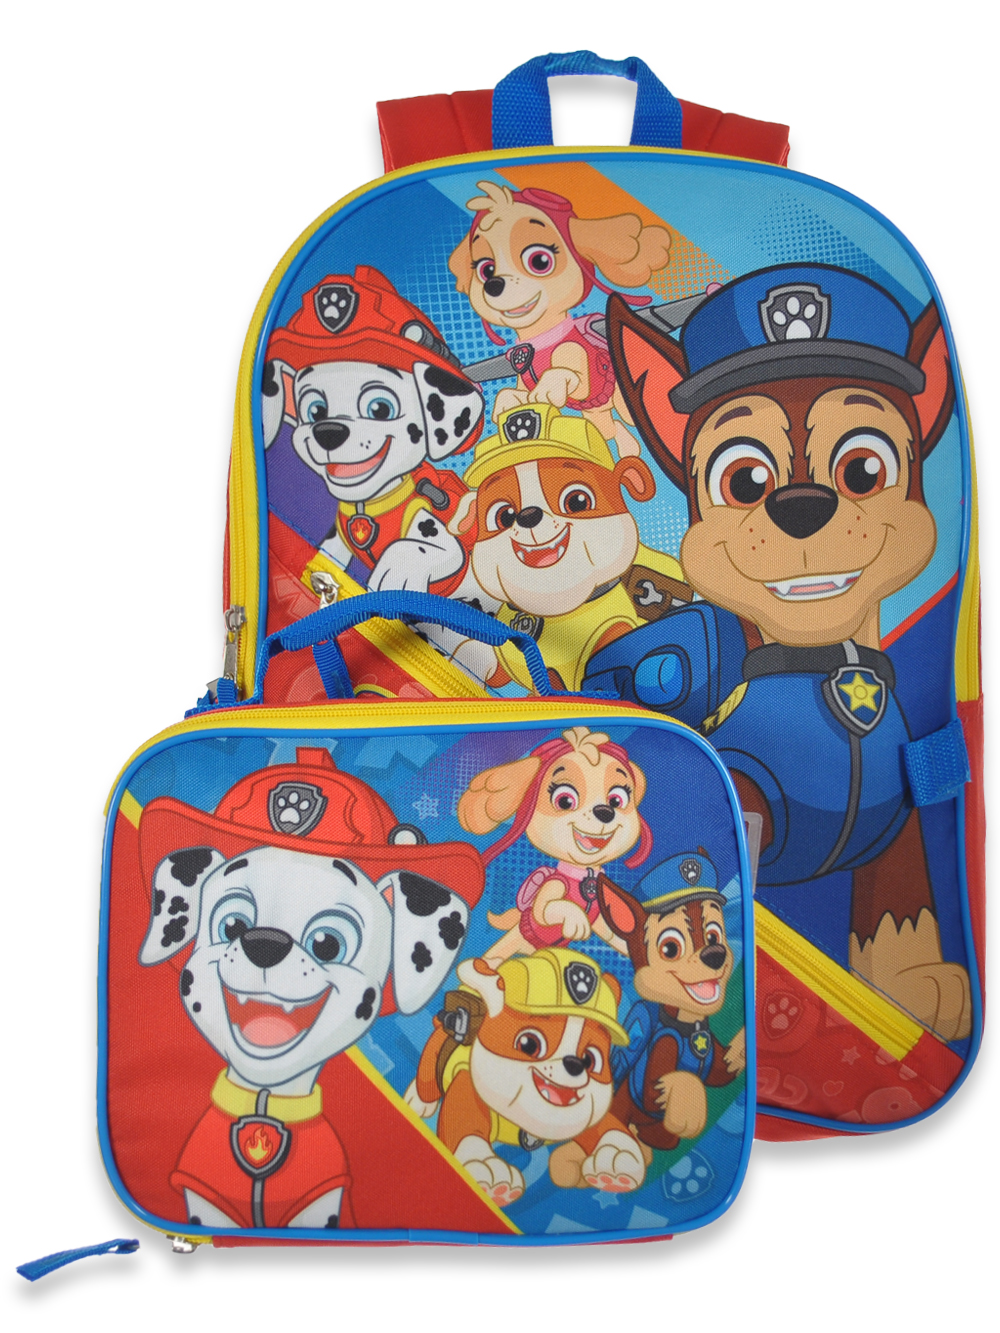 Paw Patrol Backpack with Lunchbox - Blue/Multi, One Size